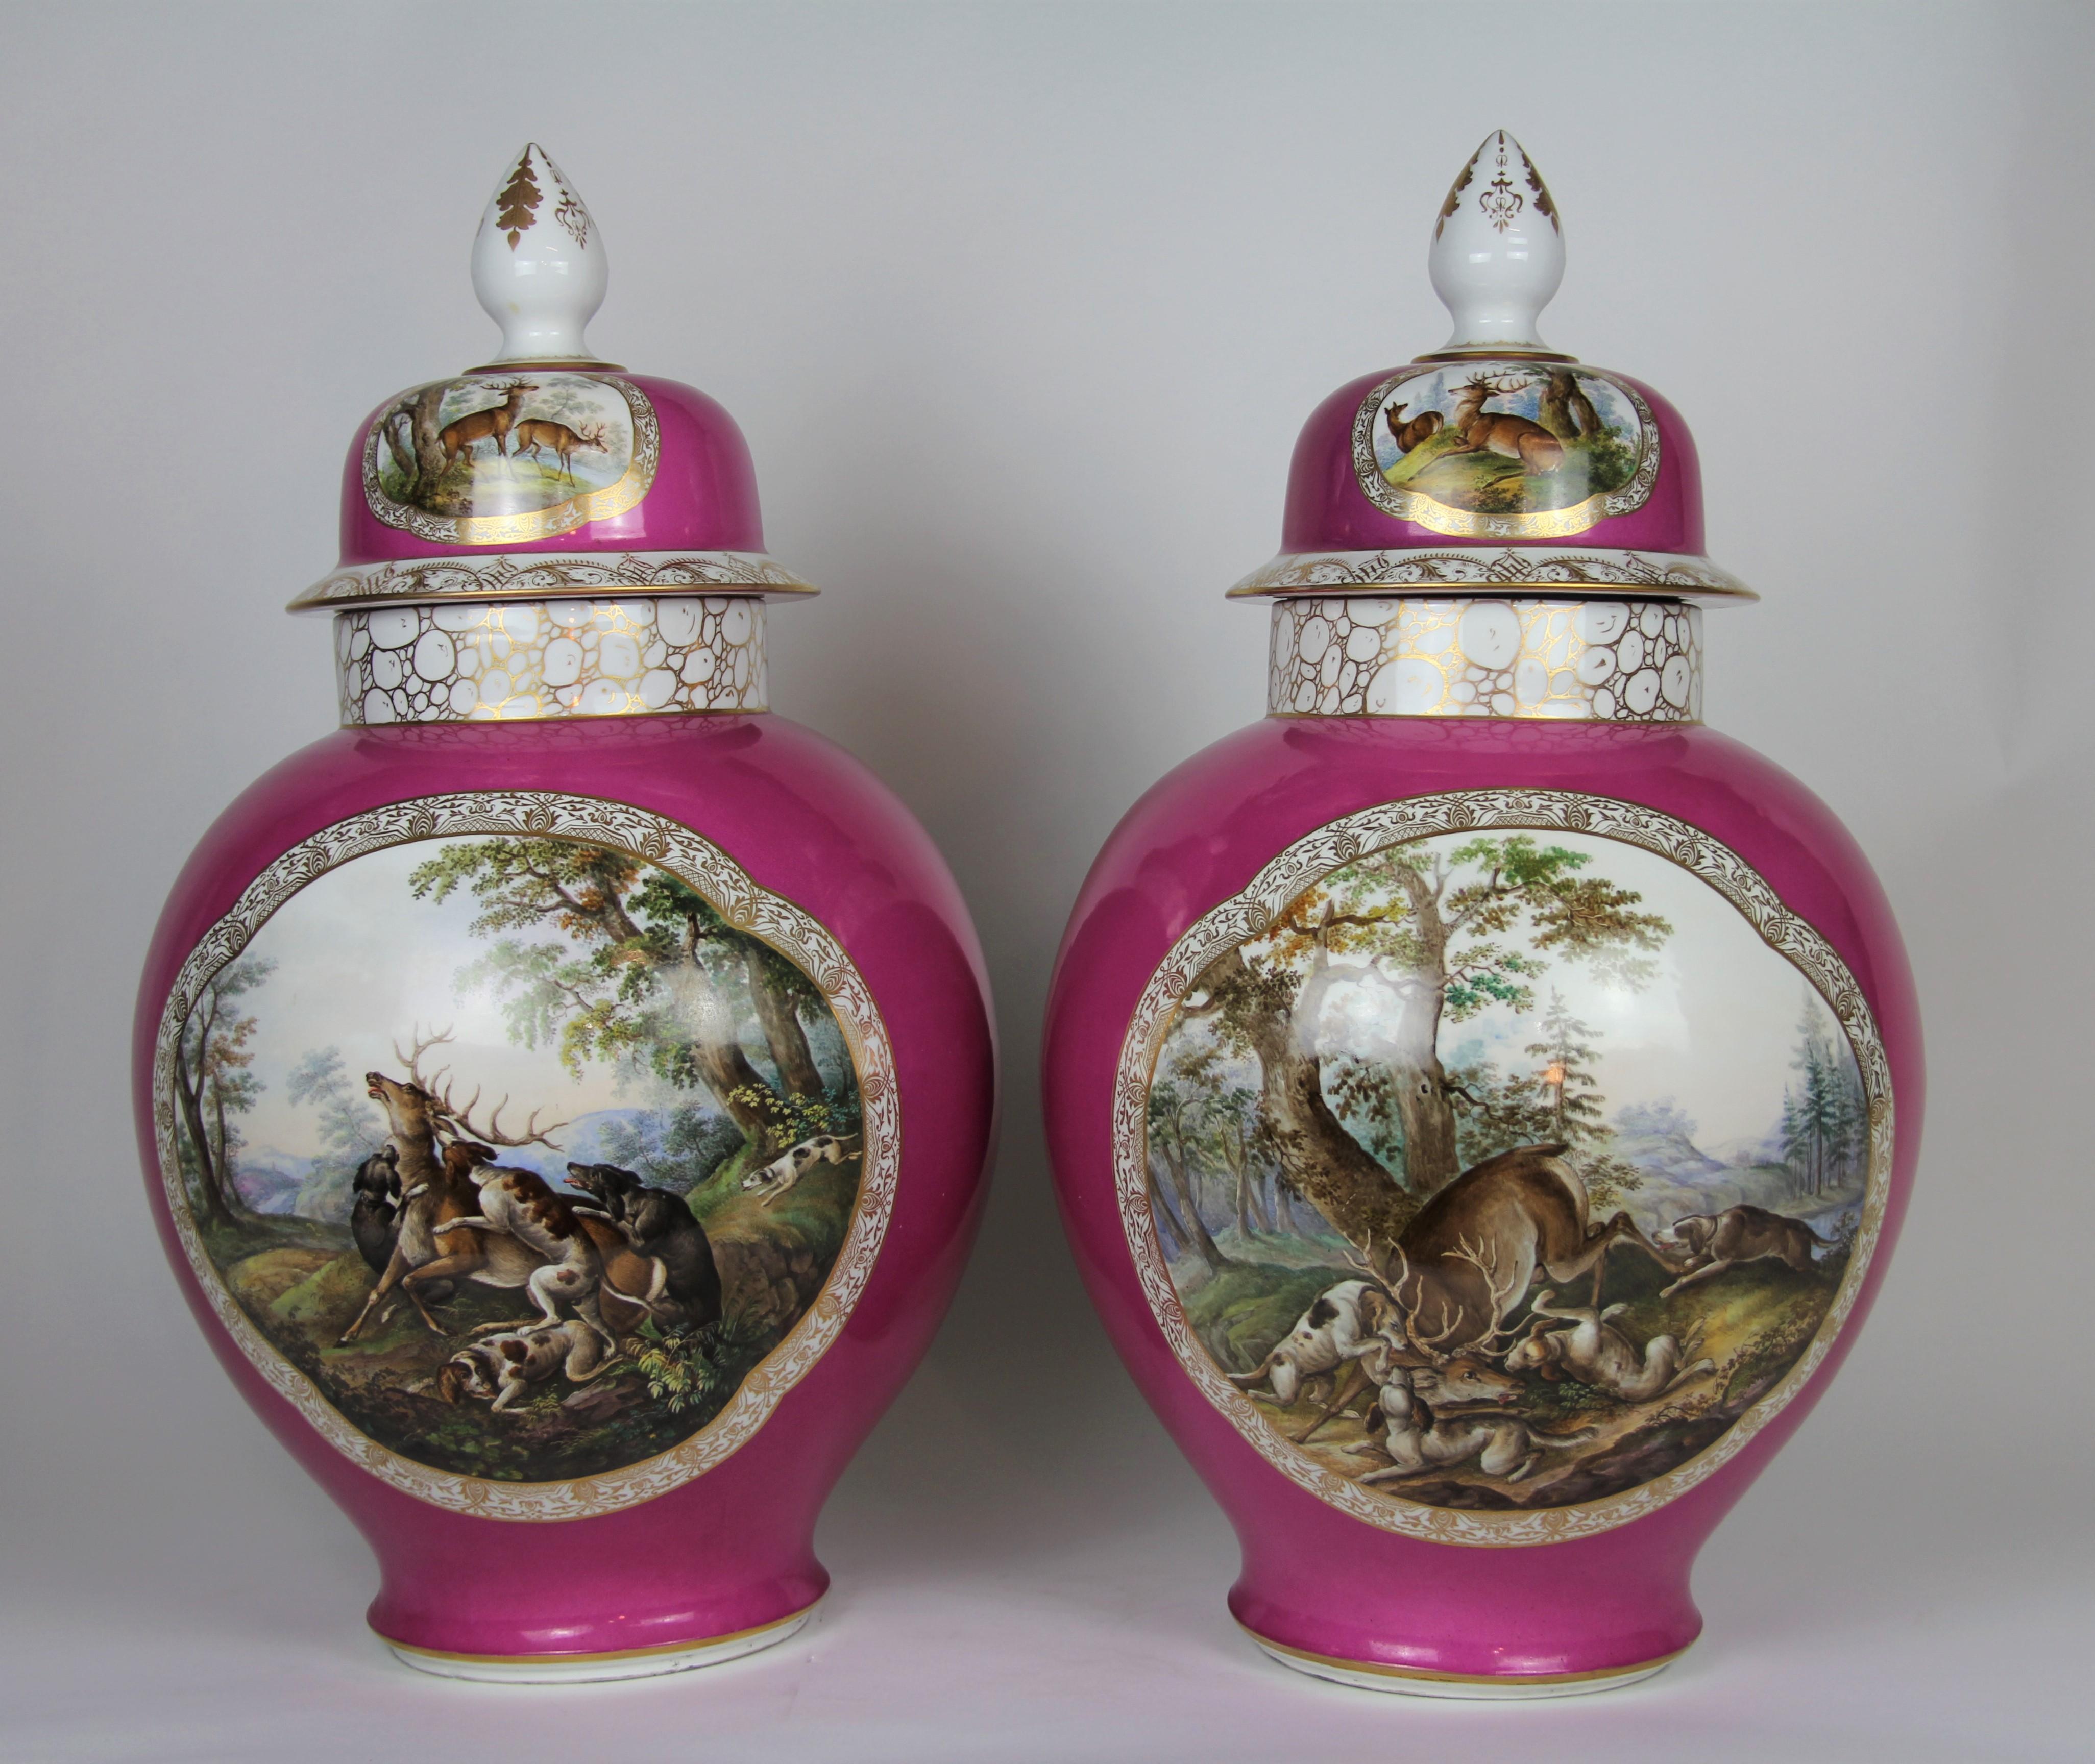 A monumental pair of 19th century Louis XVI style Augustus Rex Meissen Porcelain pink ground hunting scene covered vases. Each is beautifully hand painted with scenes of hunters, hunting dogs, deers, and trees. They are both painted with meticulous